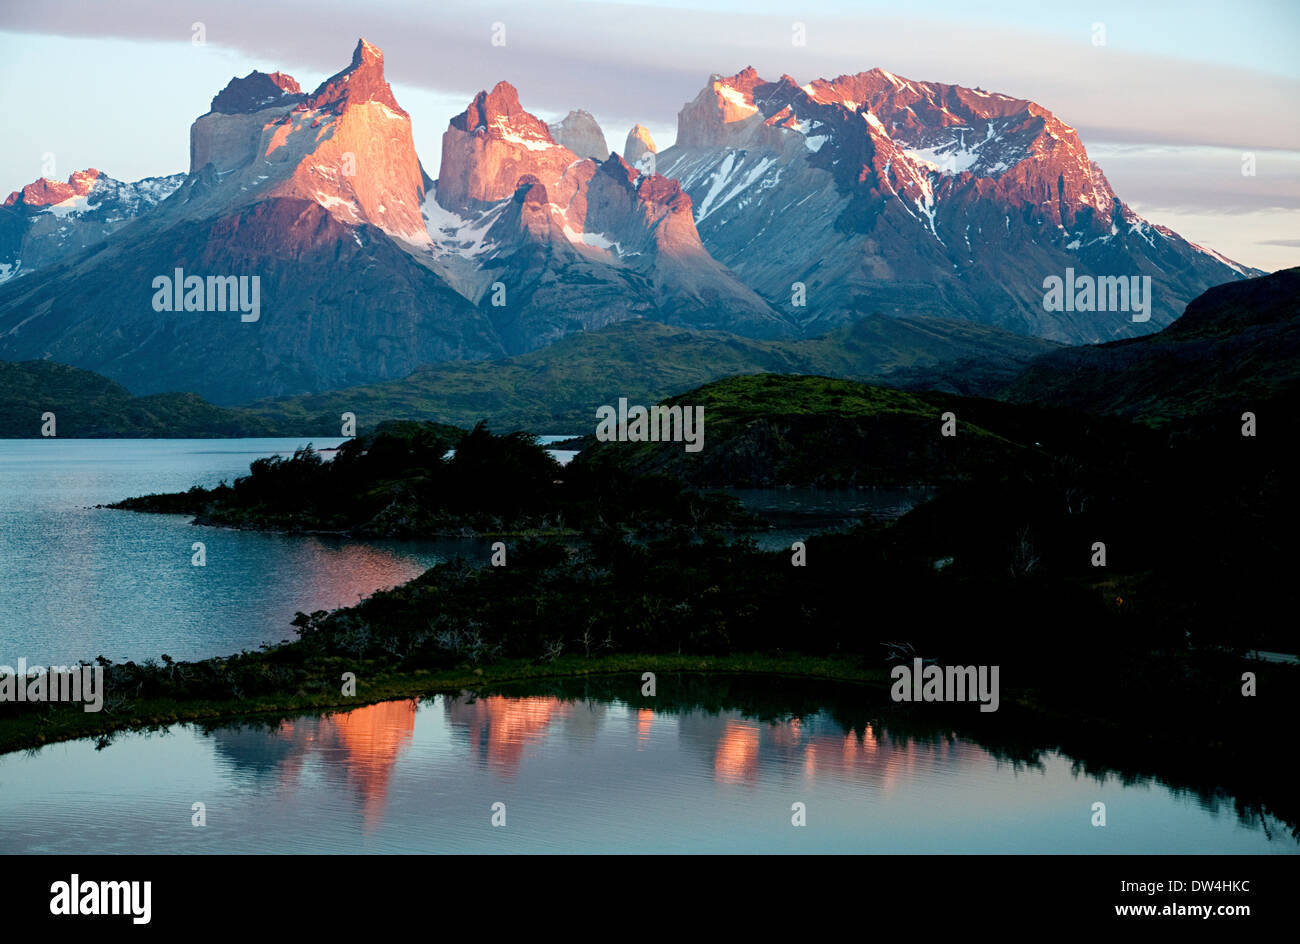 Cuernos del Paine from Lake Pehoé in the Torres del Paine National Park, Magallanes Region, Patagonia, Chile, South America Stock Photo